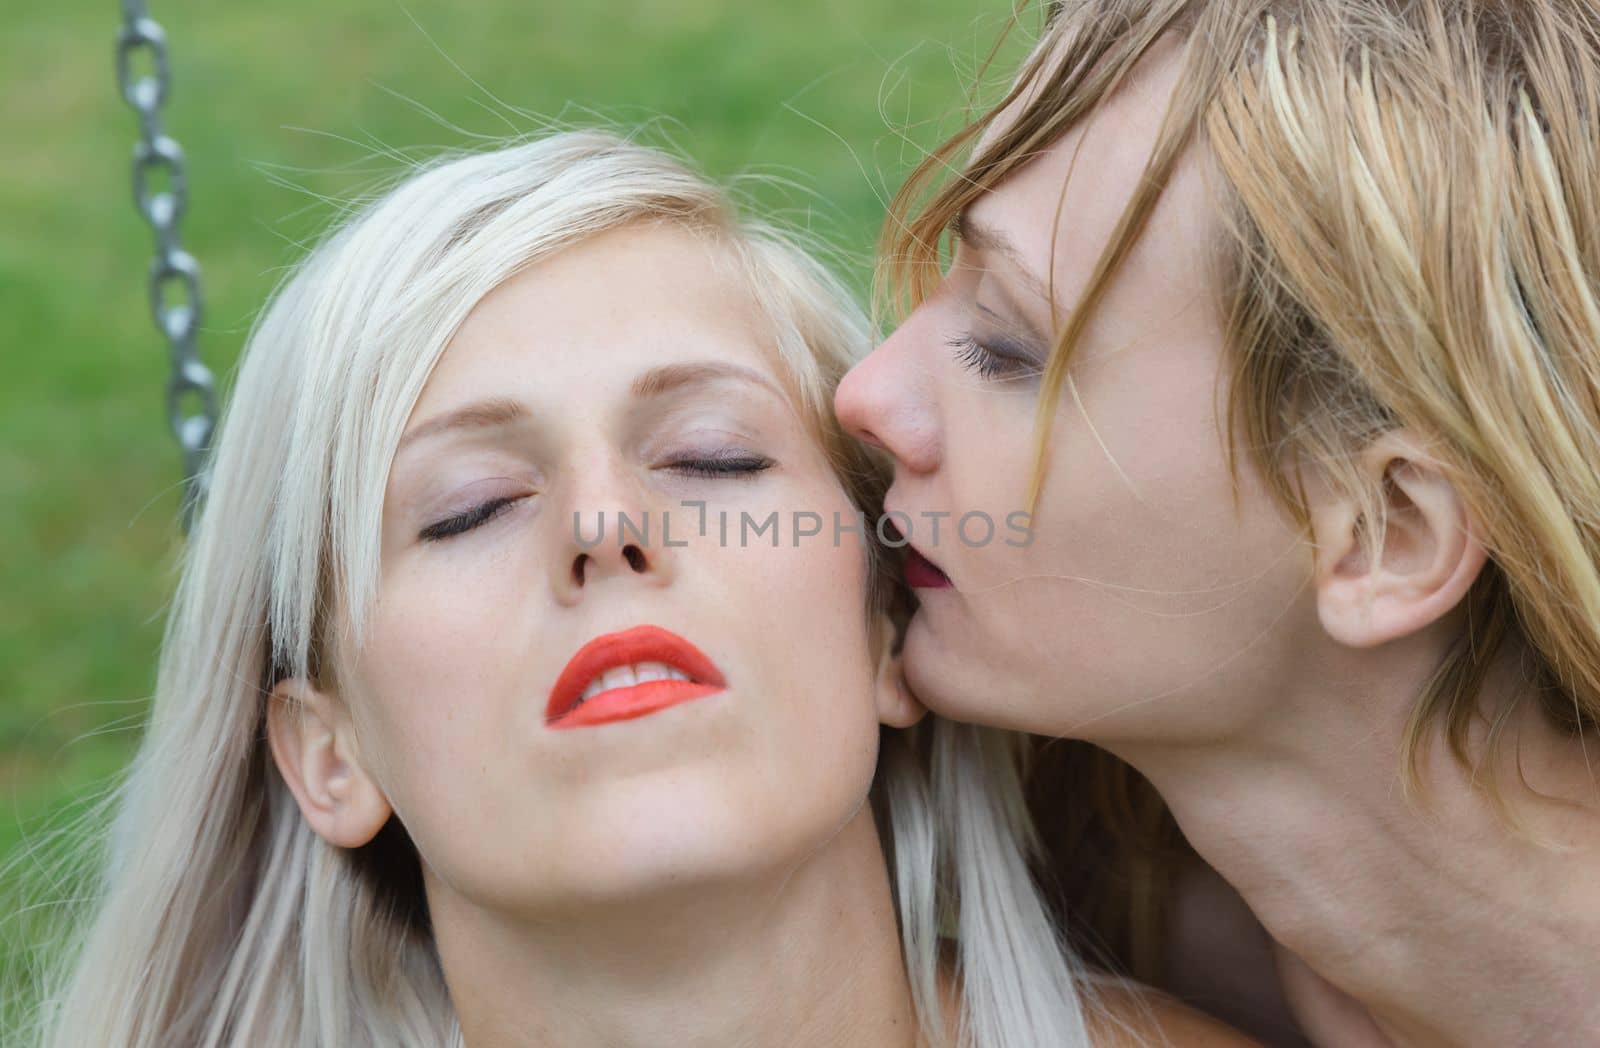 Two women, one blonde and one brunette, are  sharing a romantic moment outdoors on a sunny day. They express their love and passion for each other with a kiss, conveying a beautiful and tender emotion